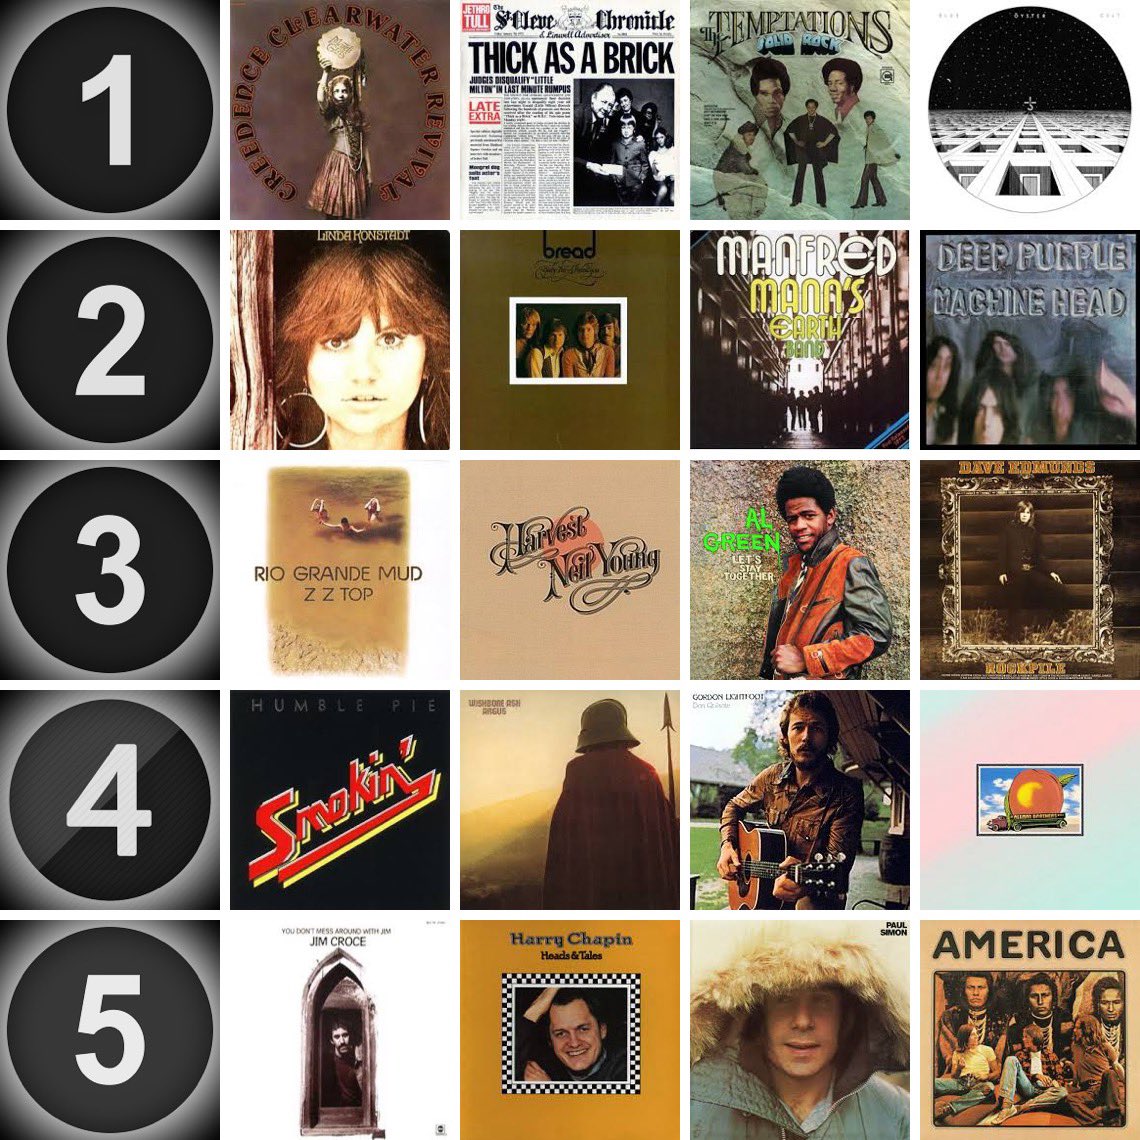 January-April 1972 Album Releases Pick ONE from EACH ROW